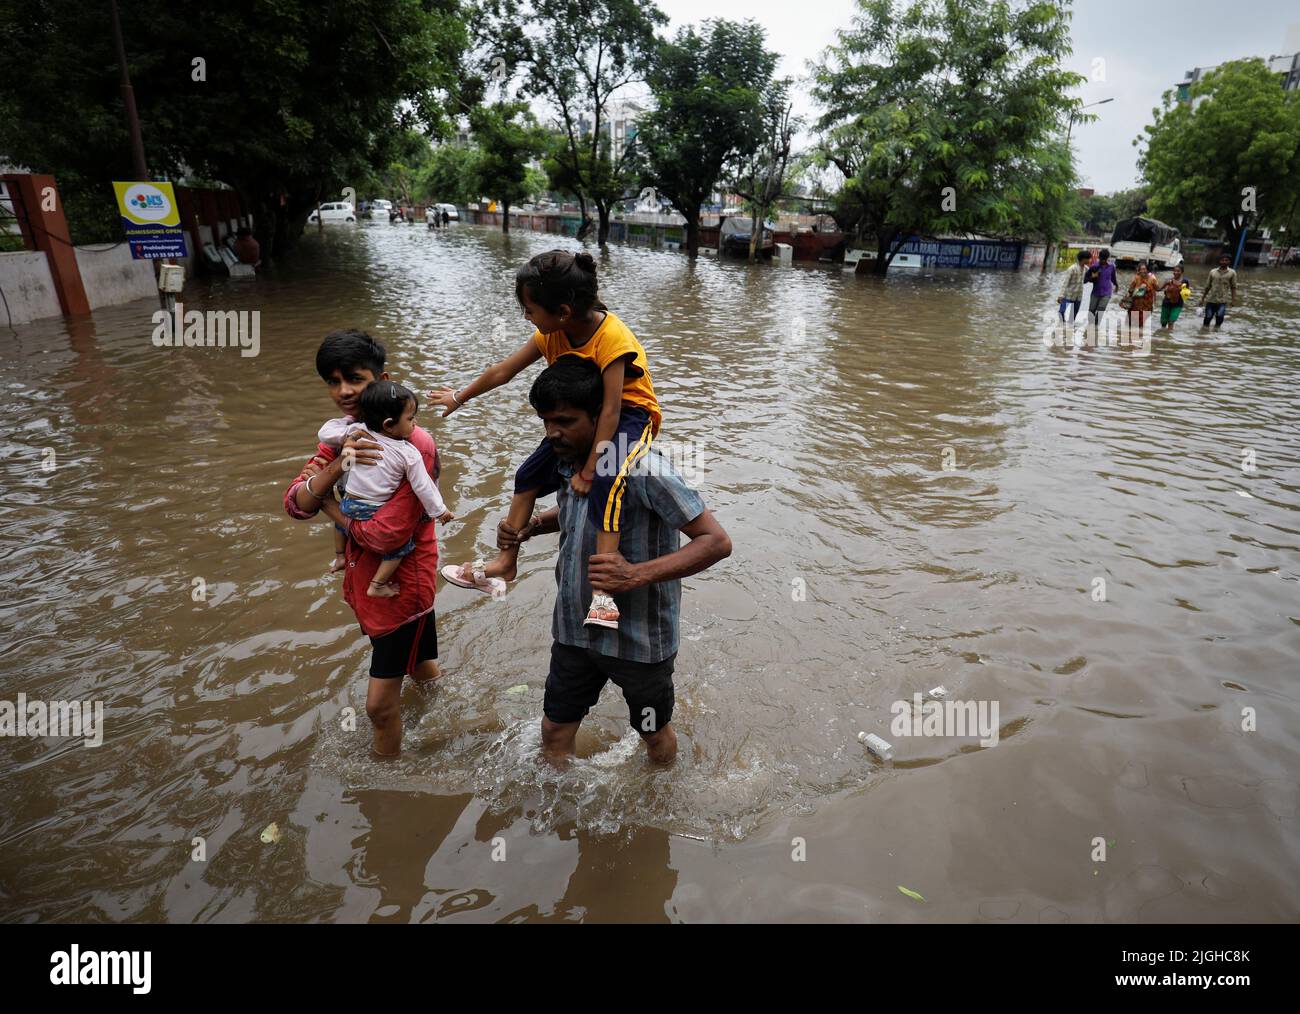 People walk through a flooded street after heavy rains in Ahmedabad, India, July 11, 2022. REUTERS/Amit Dave Stock Photo